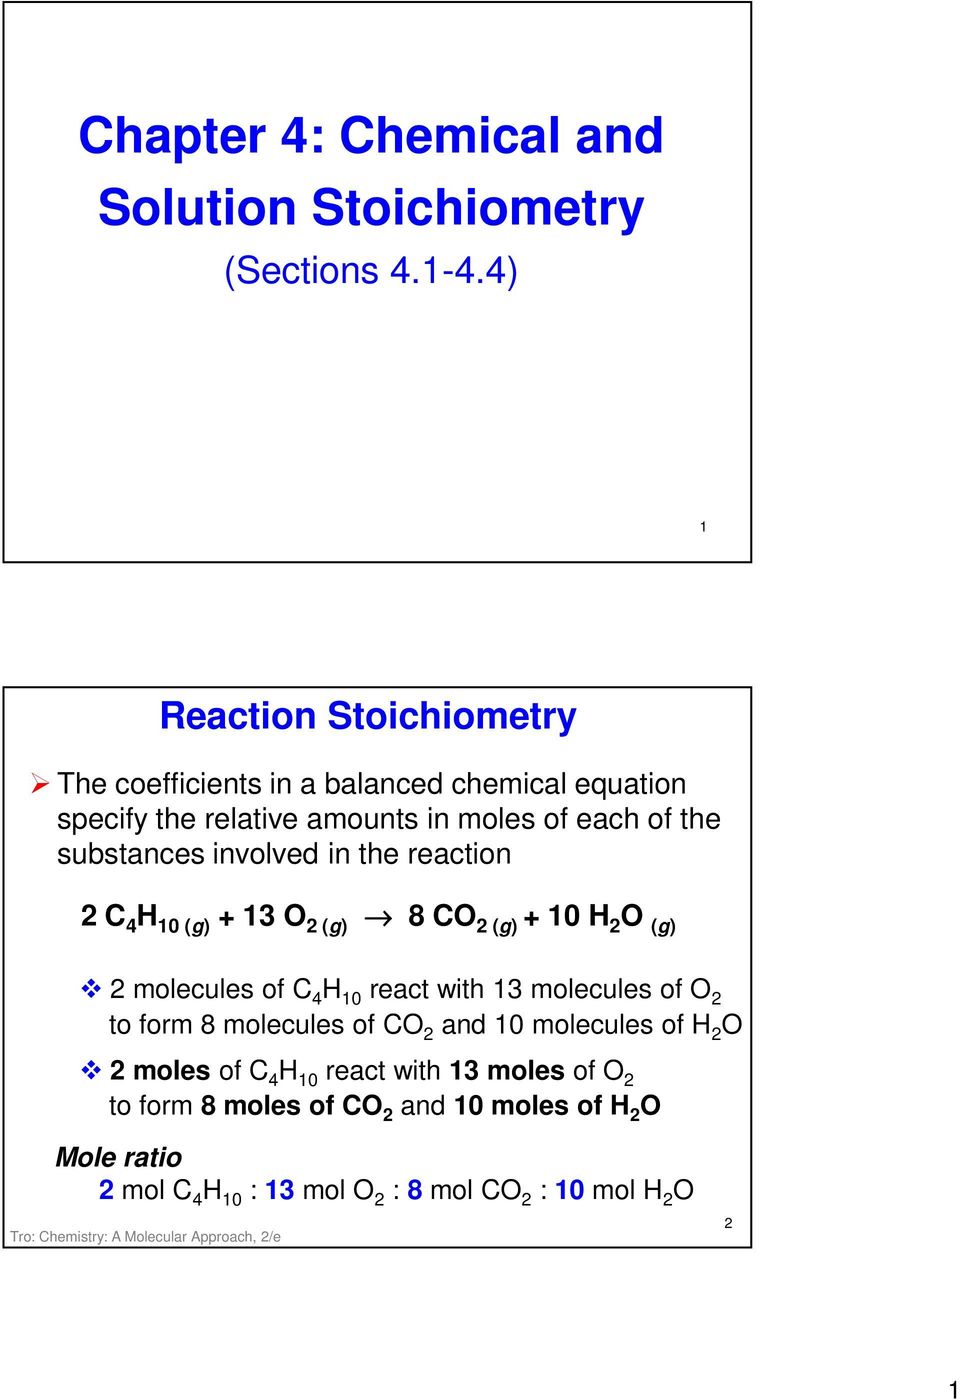 substances involved in the reaction 2 C 4 H 10 (g) + 1 O 2 (g) 8 CO 2 (g) + 10 H 2 O (g) 2 molecules of C 4 H 10 react with 1 molecules